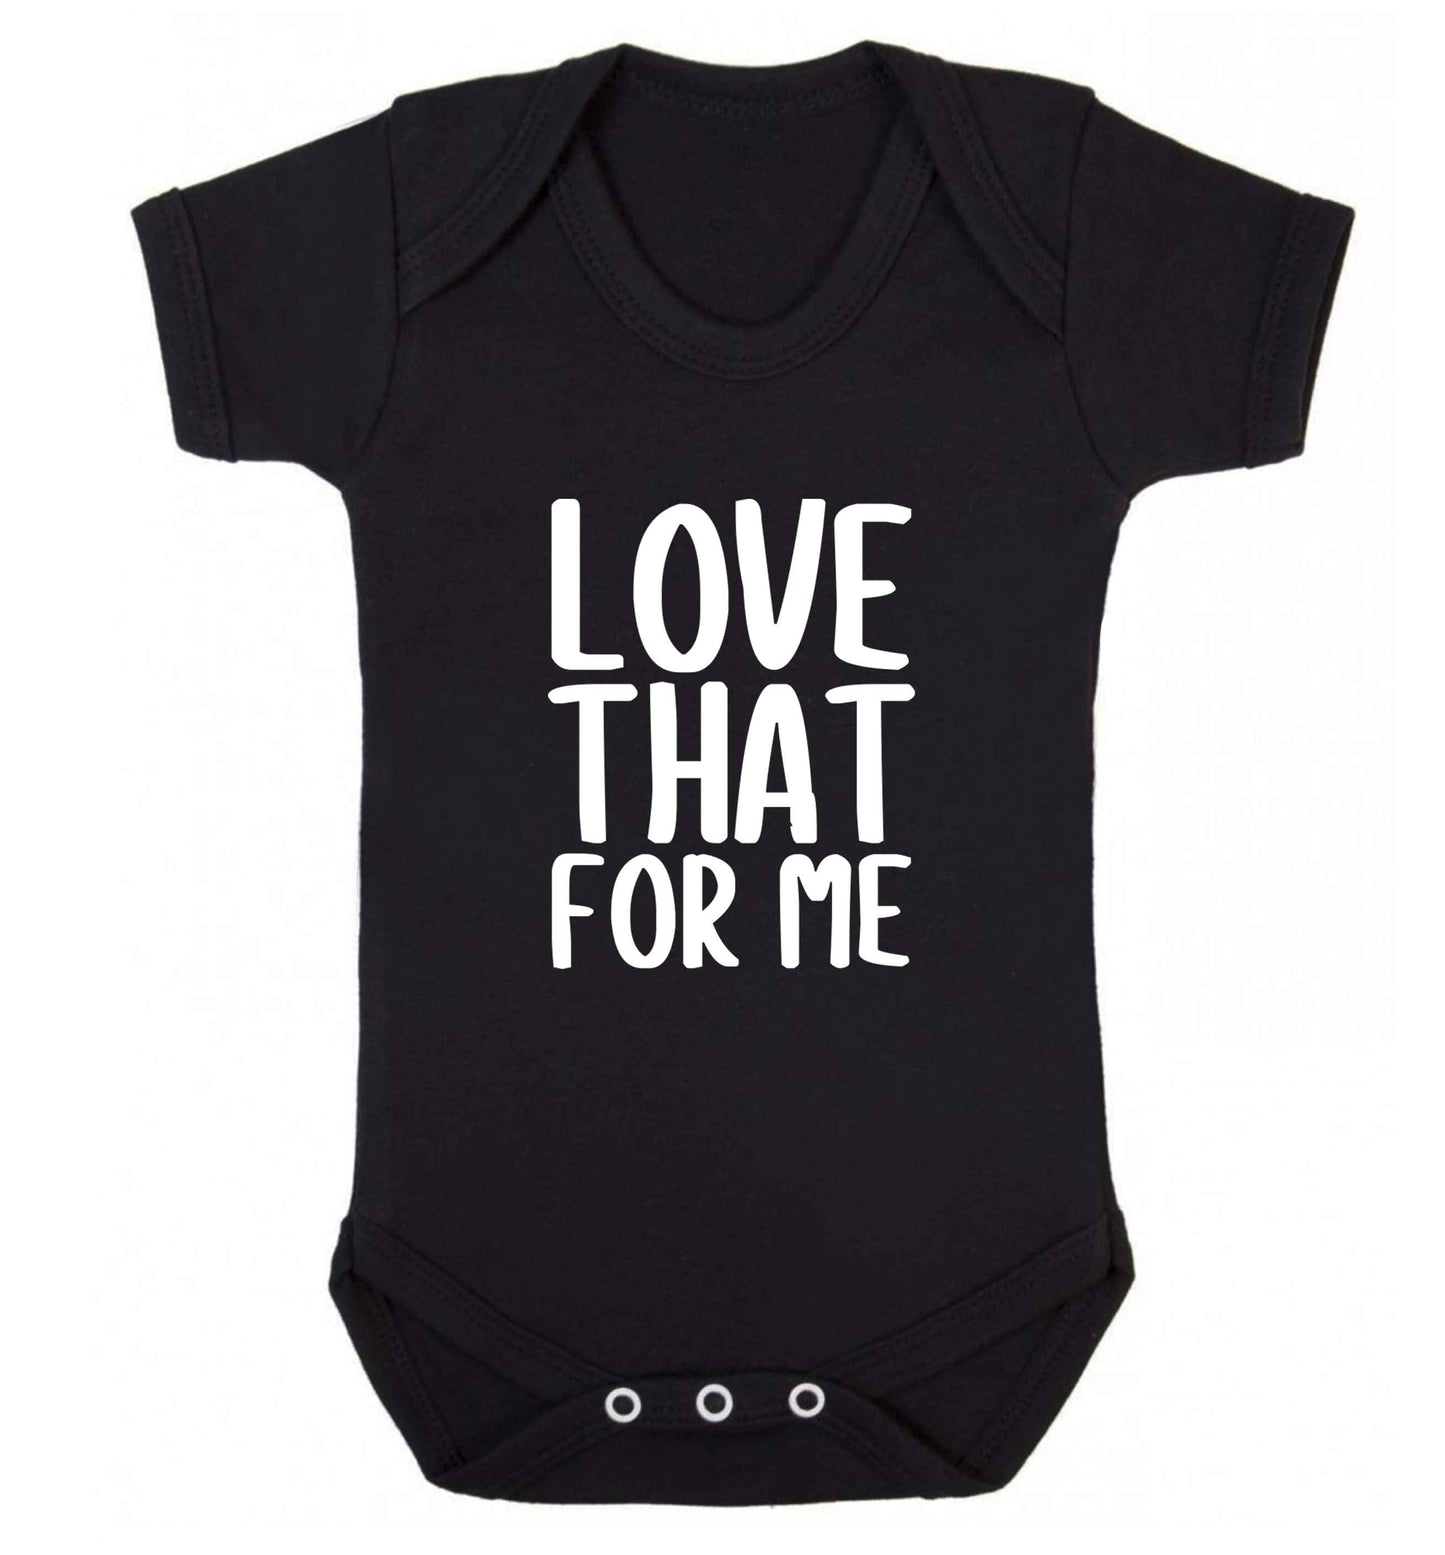 We love this for YOU! Who else loves saying this?!  baby vest black 18-24 months